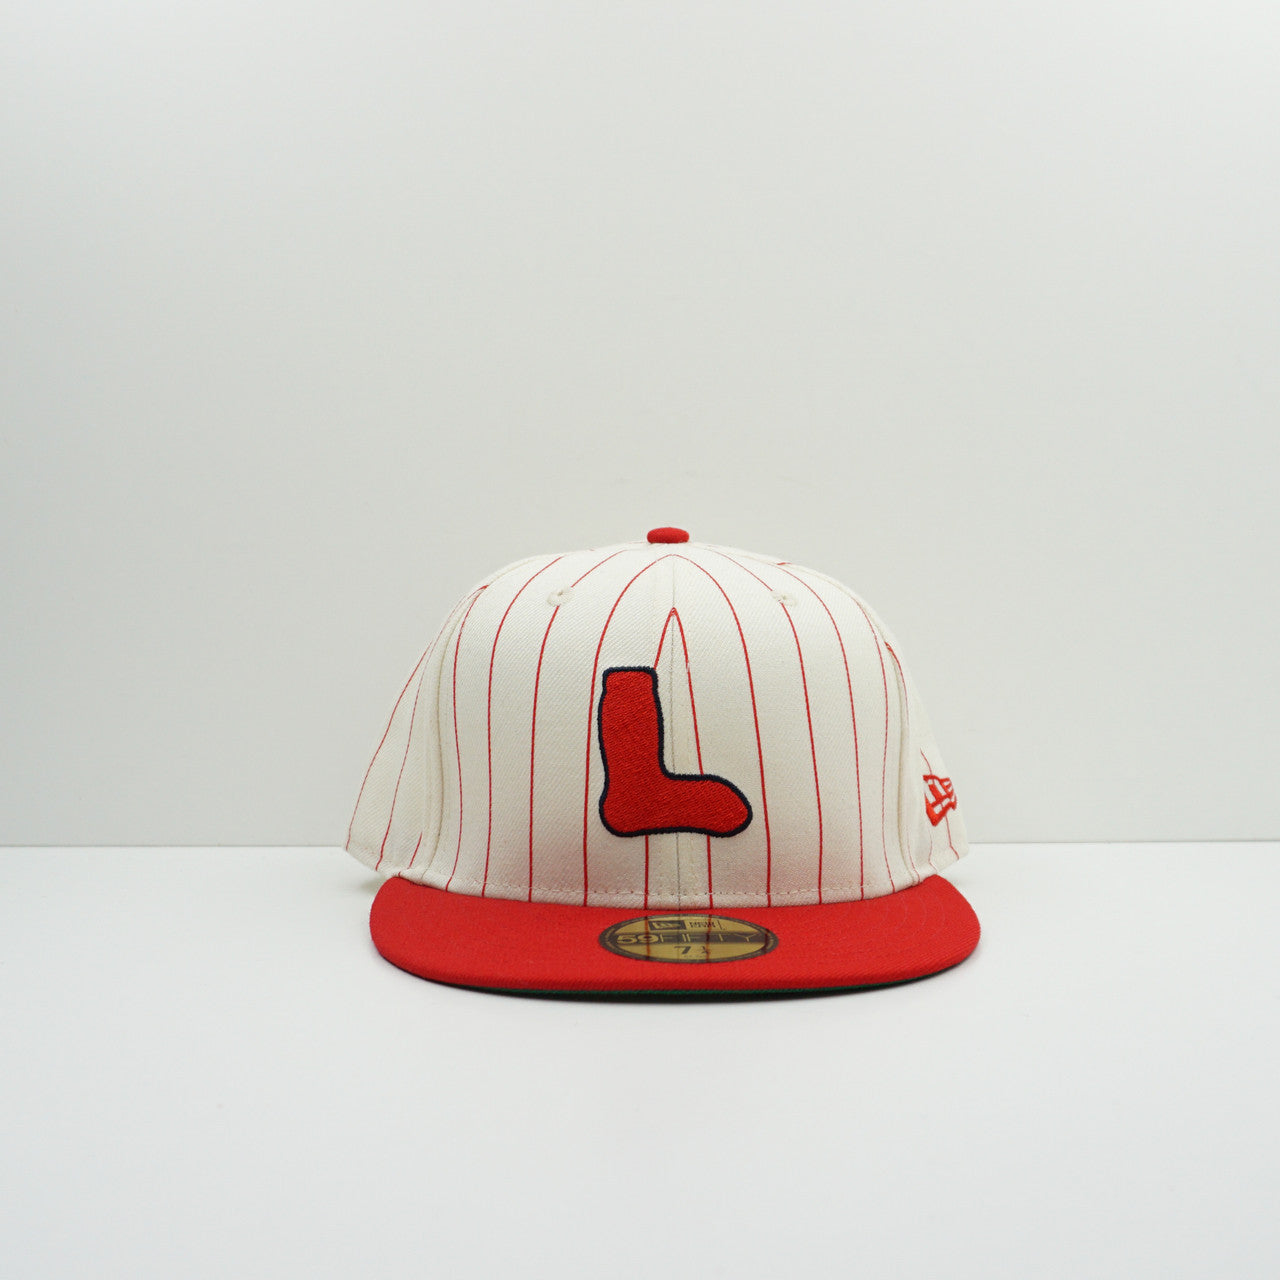 New Era Boston Red Sox Pro Model White/Red Fitted Cap